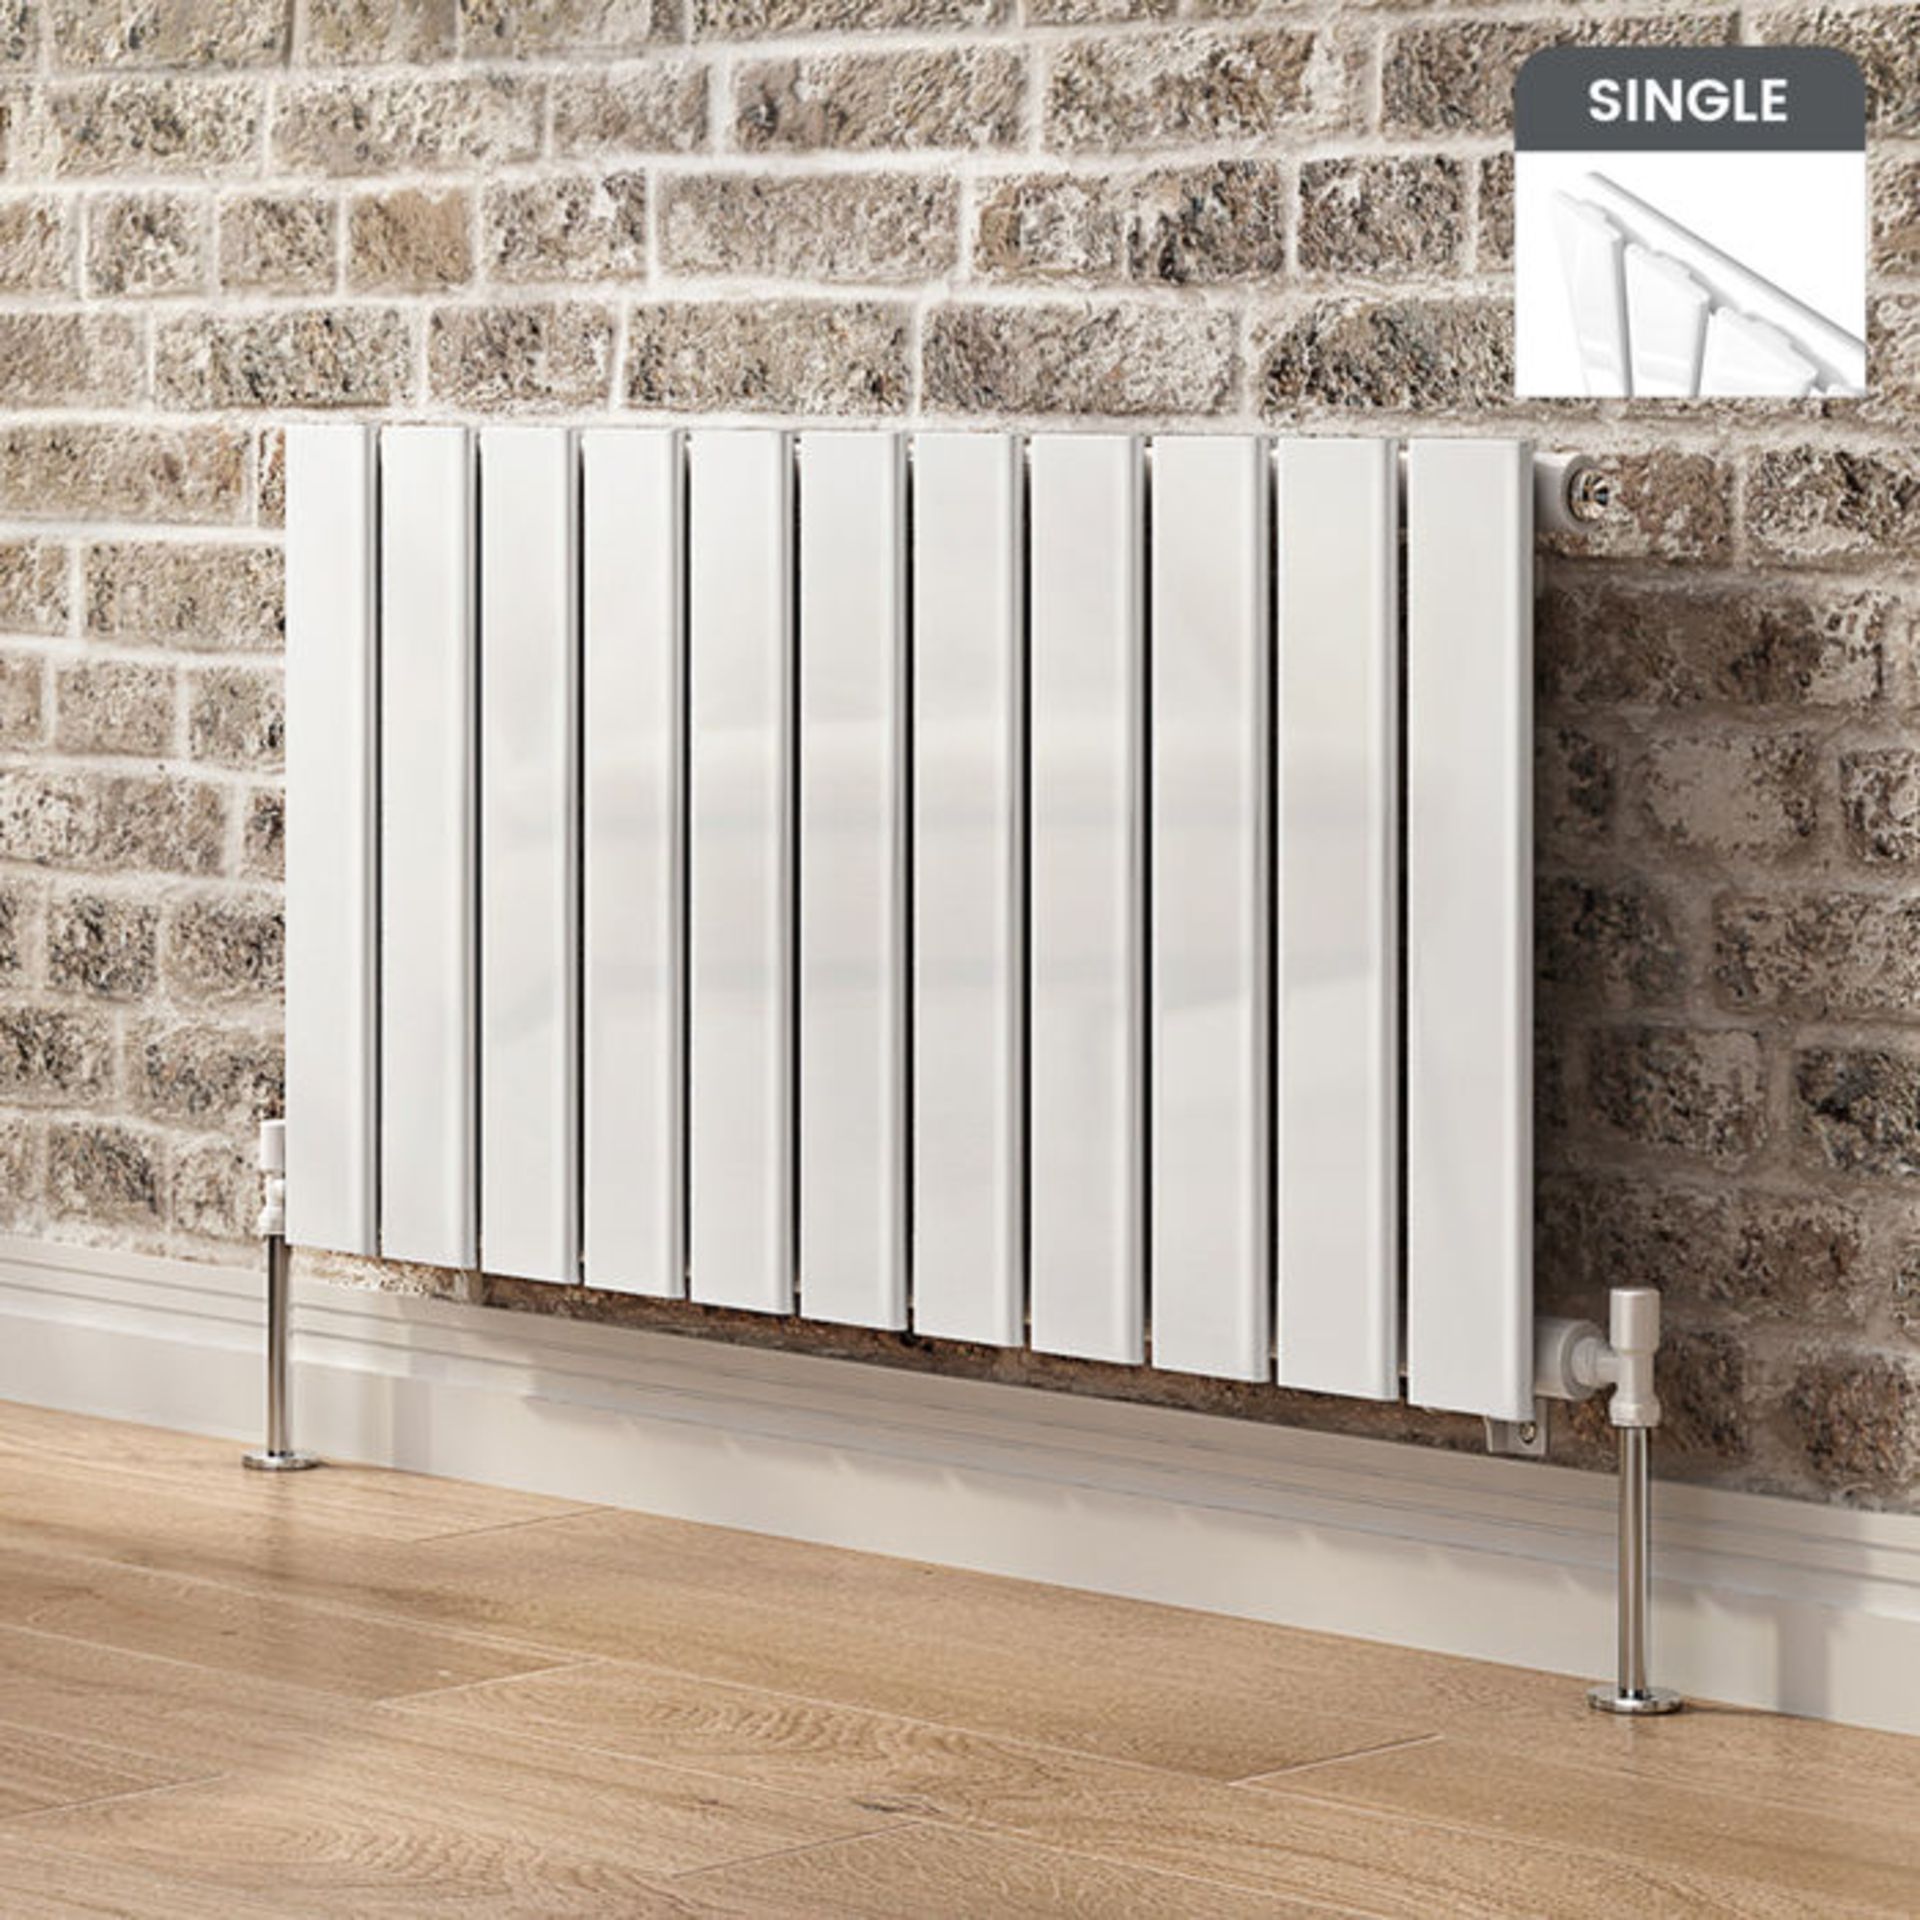 (AL208) 450x836mm Gloss White Single Flat Panel Horizontal Radiator. Made from low carbon steel with